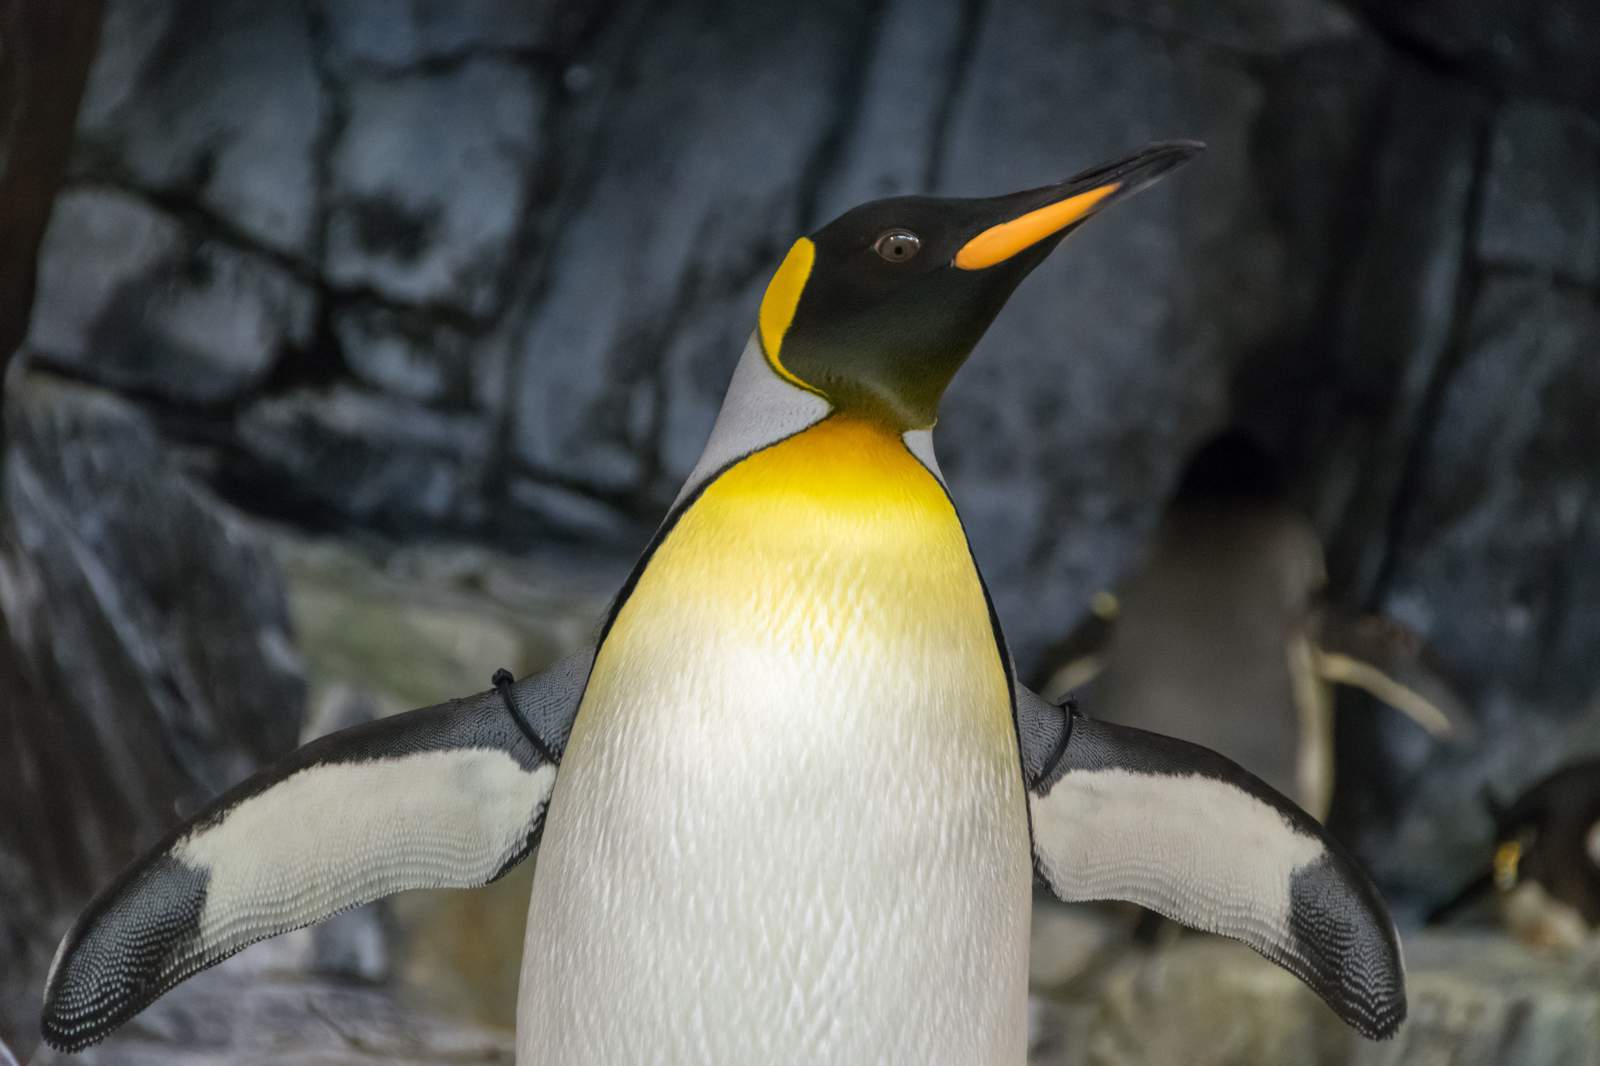 The bolt of joy we all need in our lives right now: Penguins running free in aquariums